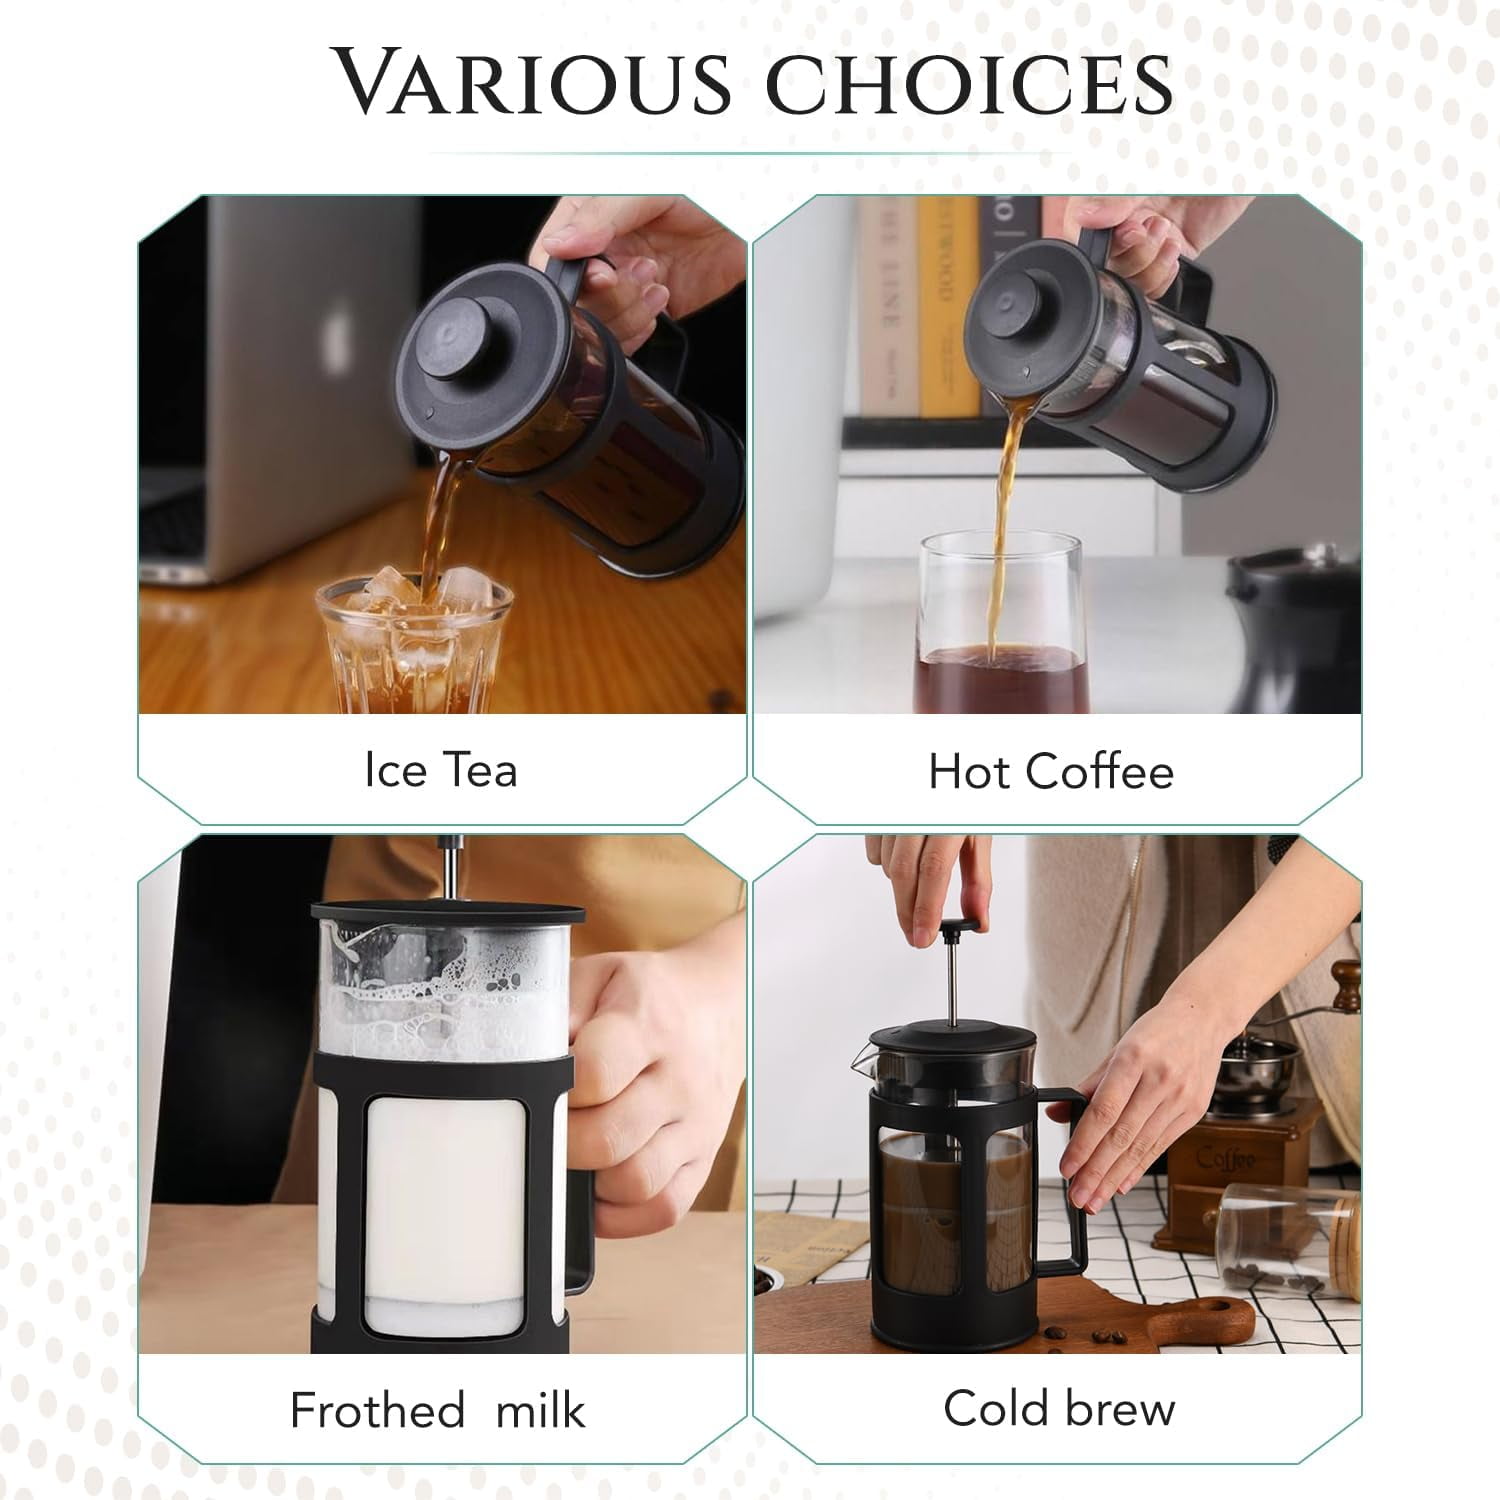 Kibhous French Press Coffee Machine Capacity 34Oz Coffee Machine, with 1  Filter, Heat-Resistant and Durable Borosilicate Glass, Black 